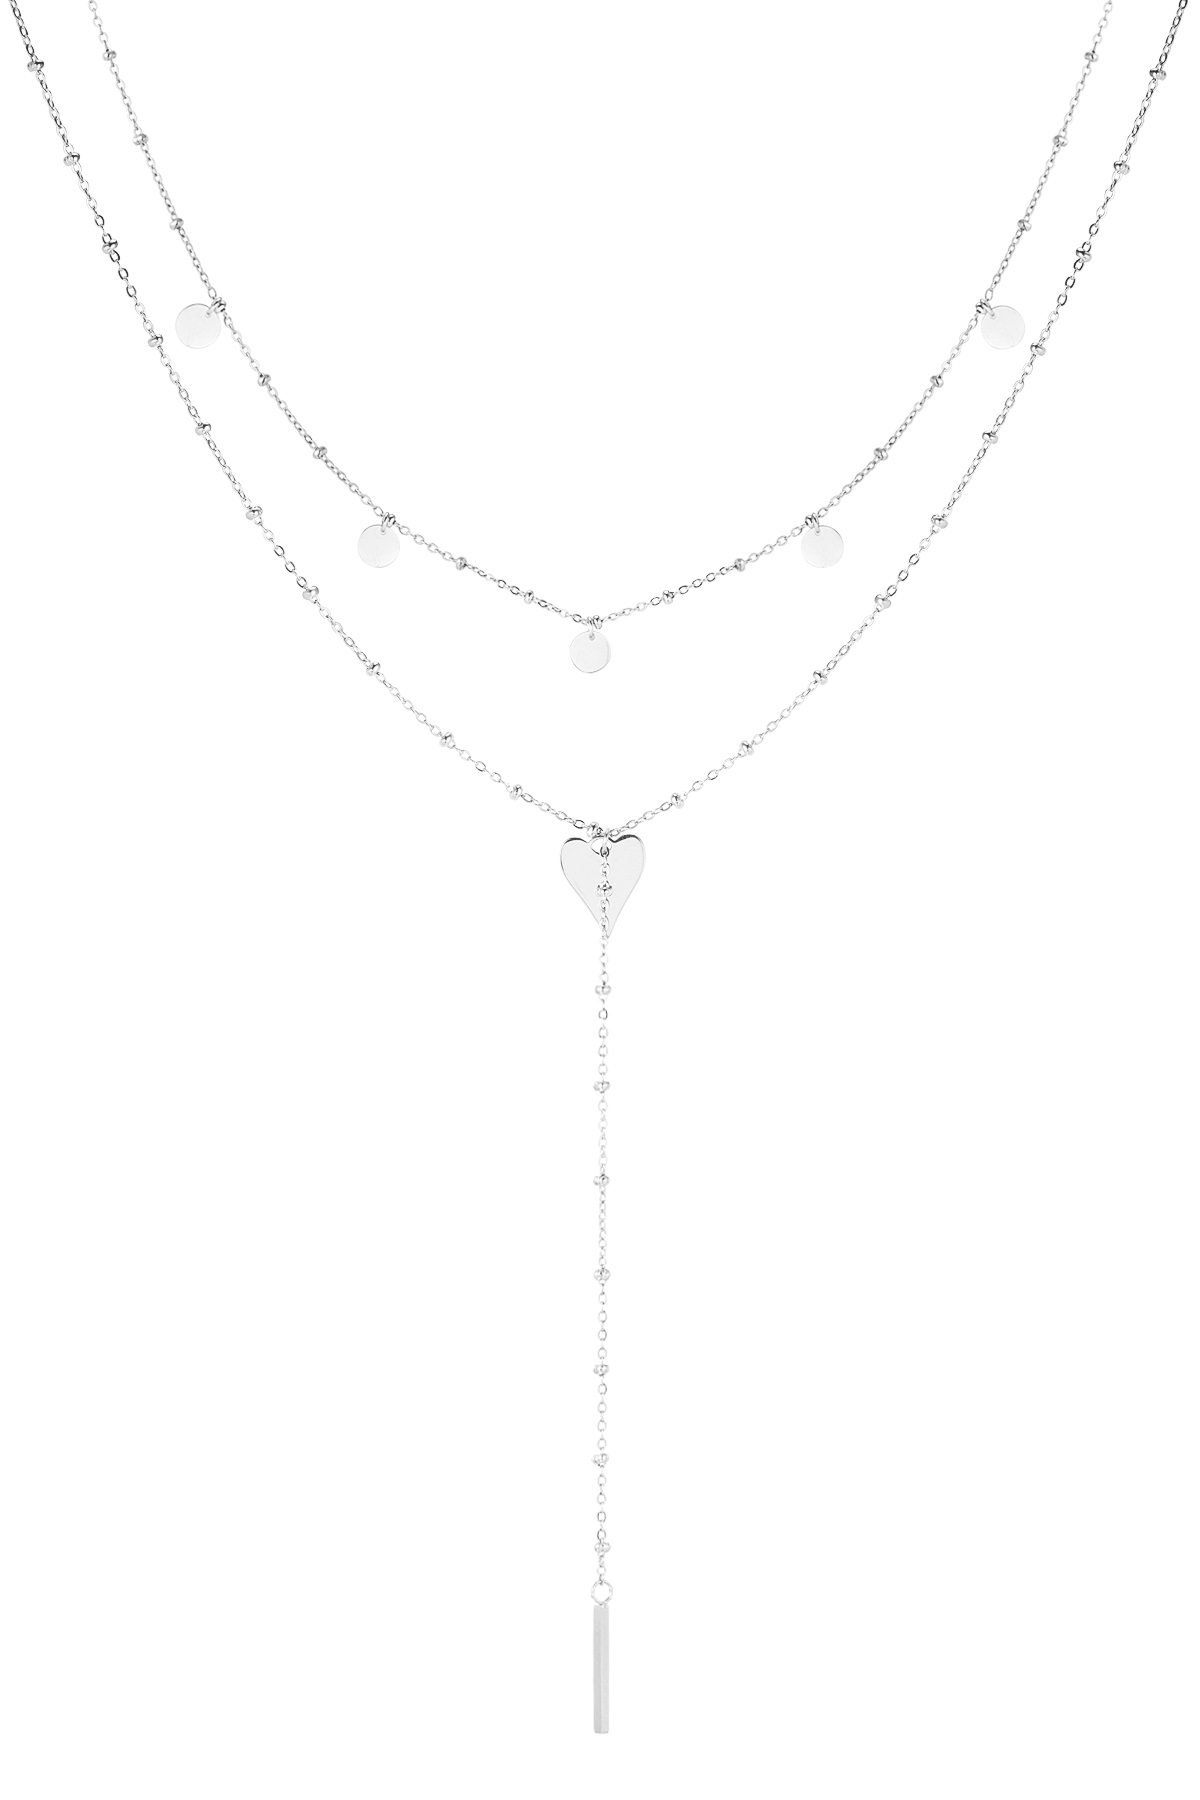 Necklace long in the middle with circles - silver